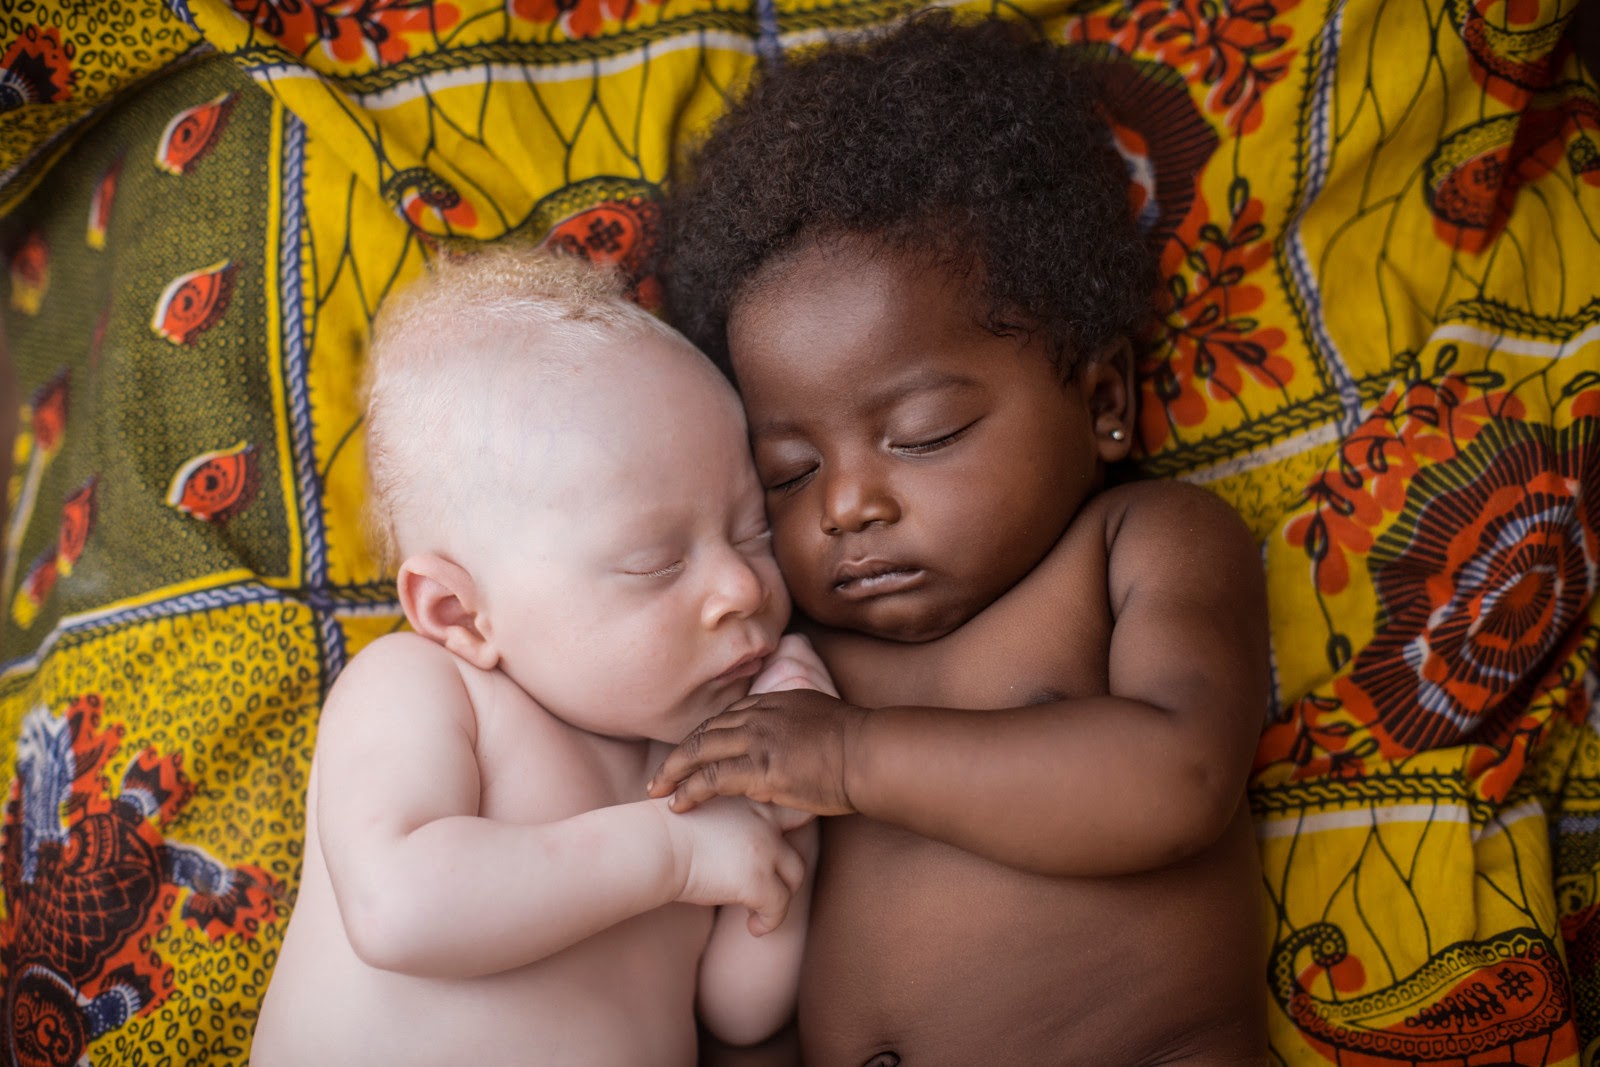 3 WEEKS-OLD NEWBORN WITH ALBINISM HAPPILY SLEEPING WITH HIS COUSIN IN KINSHASA, CONGO PHOTO PATRICIA WILLOCQ - 29 Breathtaking Photographs of The Human Race